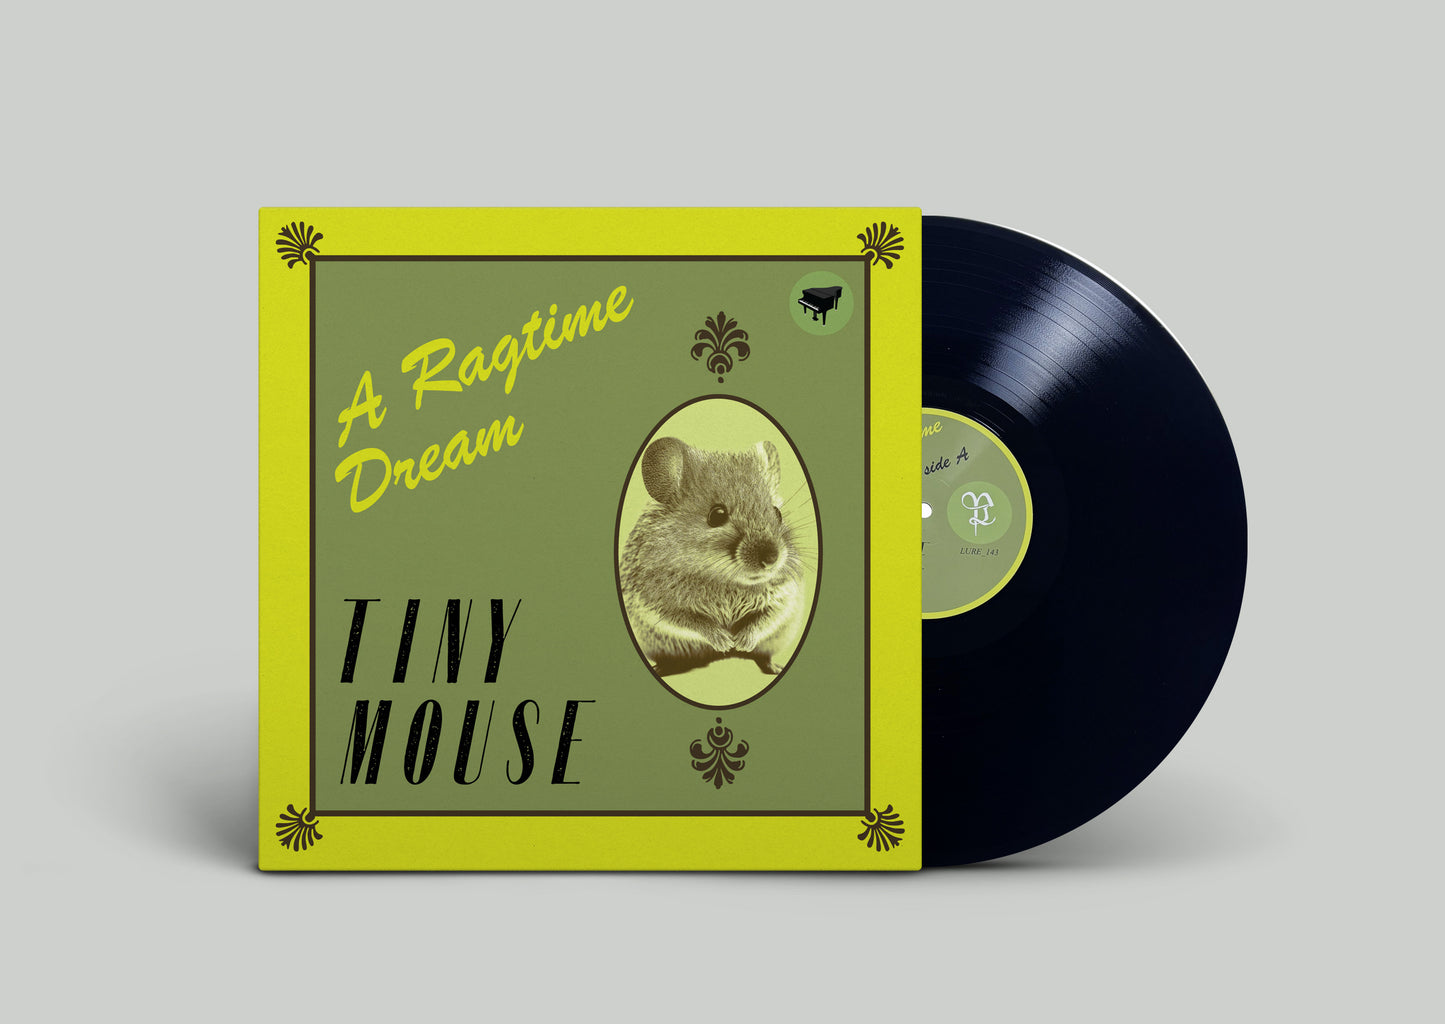 TINY MOUSE - A Ragtime Dream LP